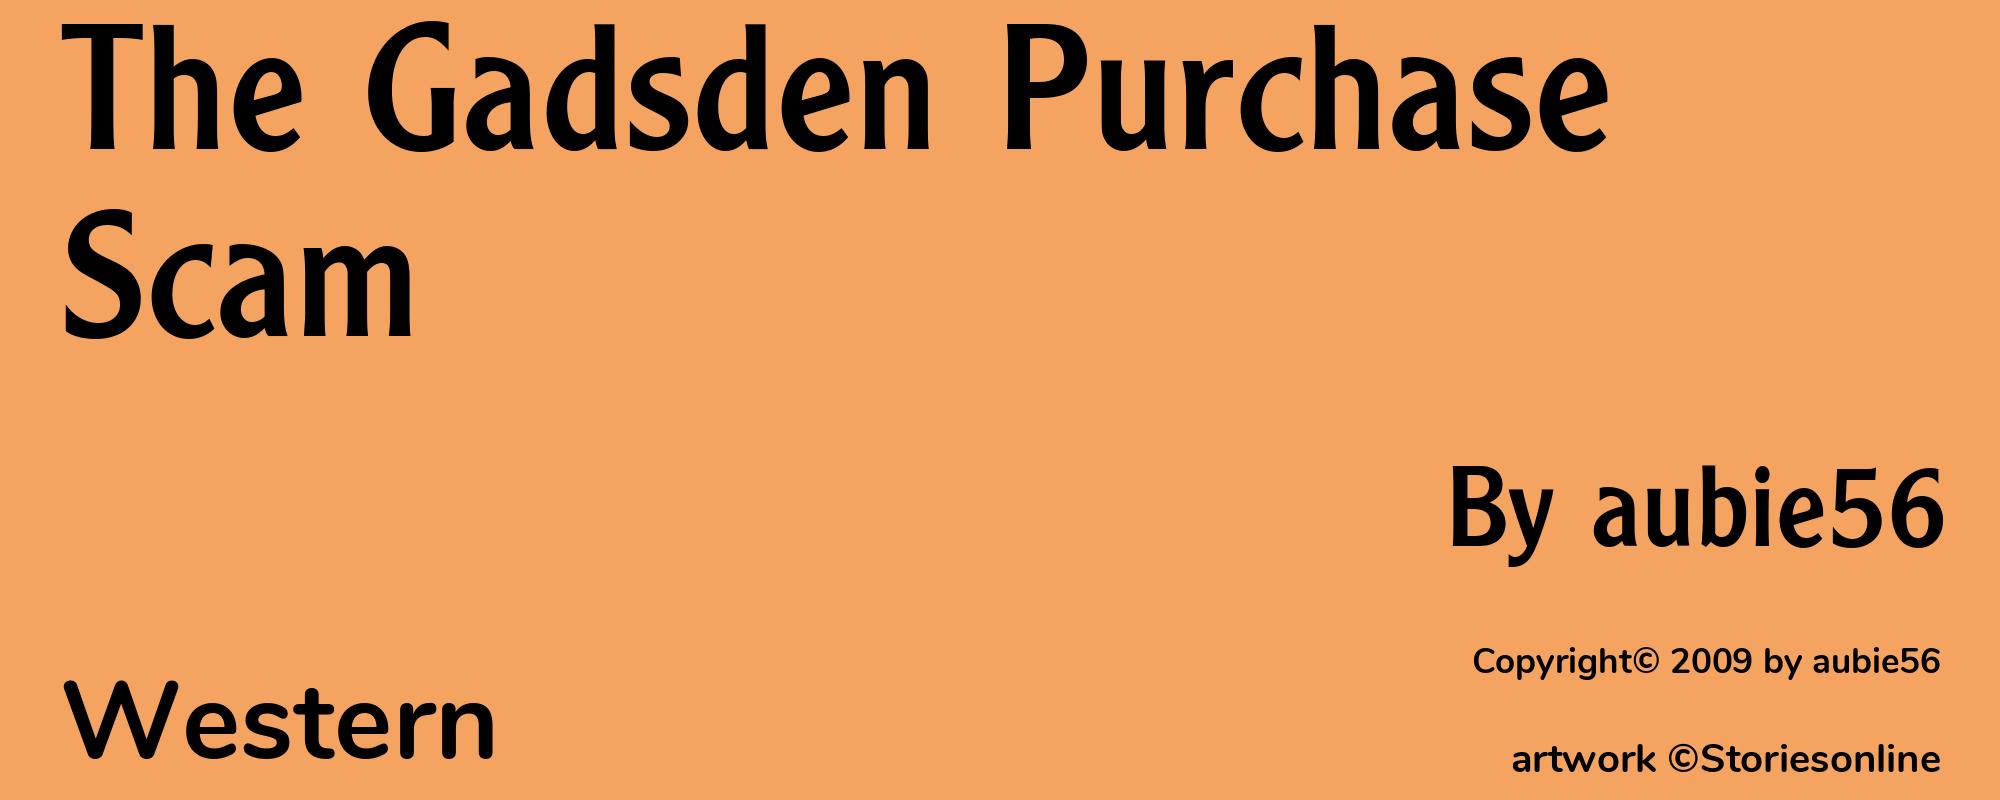 The Gadsden Purchase Scam - Cover